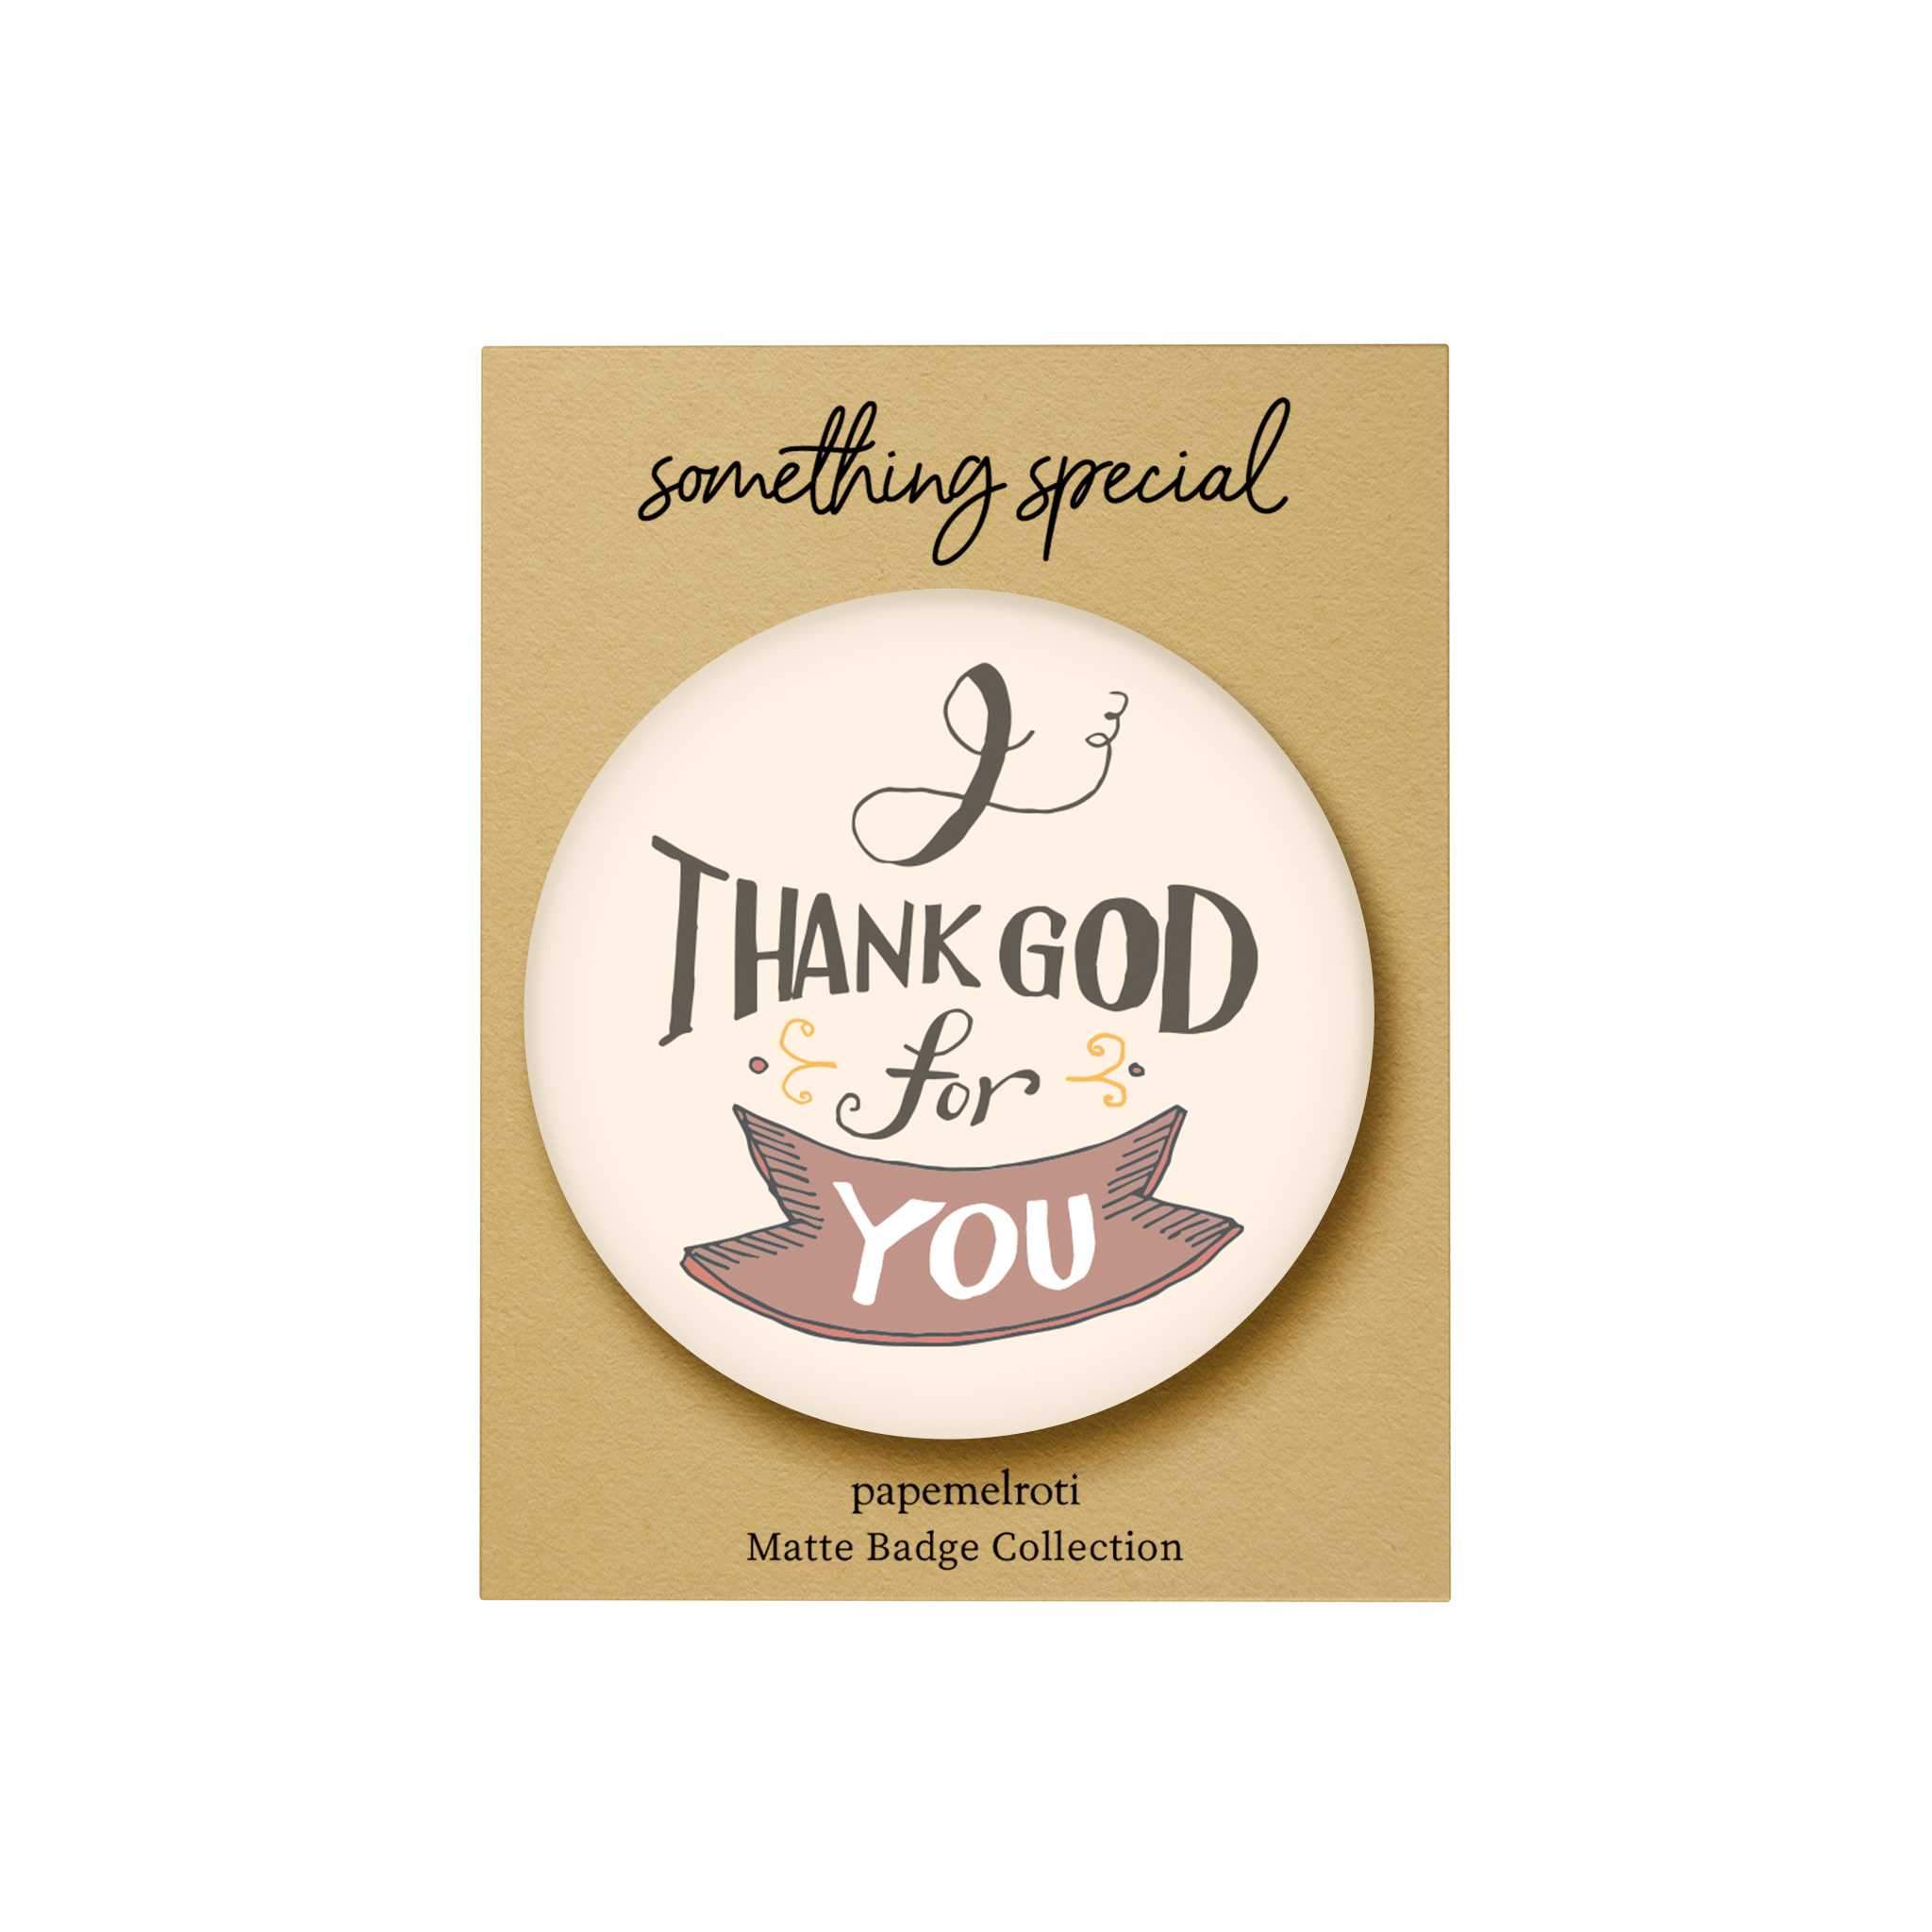 Words of Love Badge: I Thank God for You